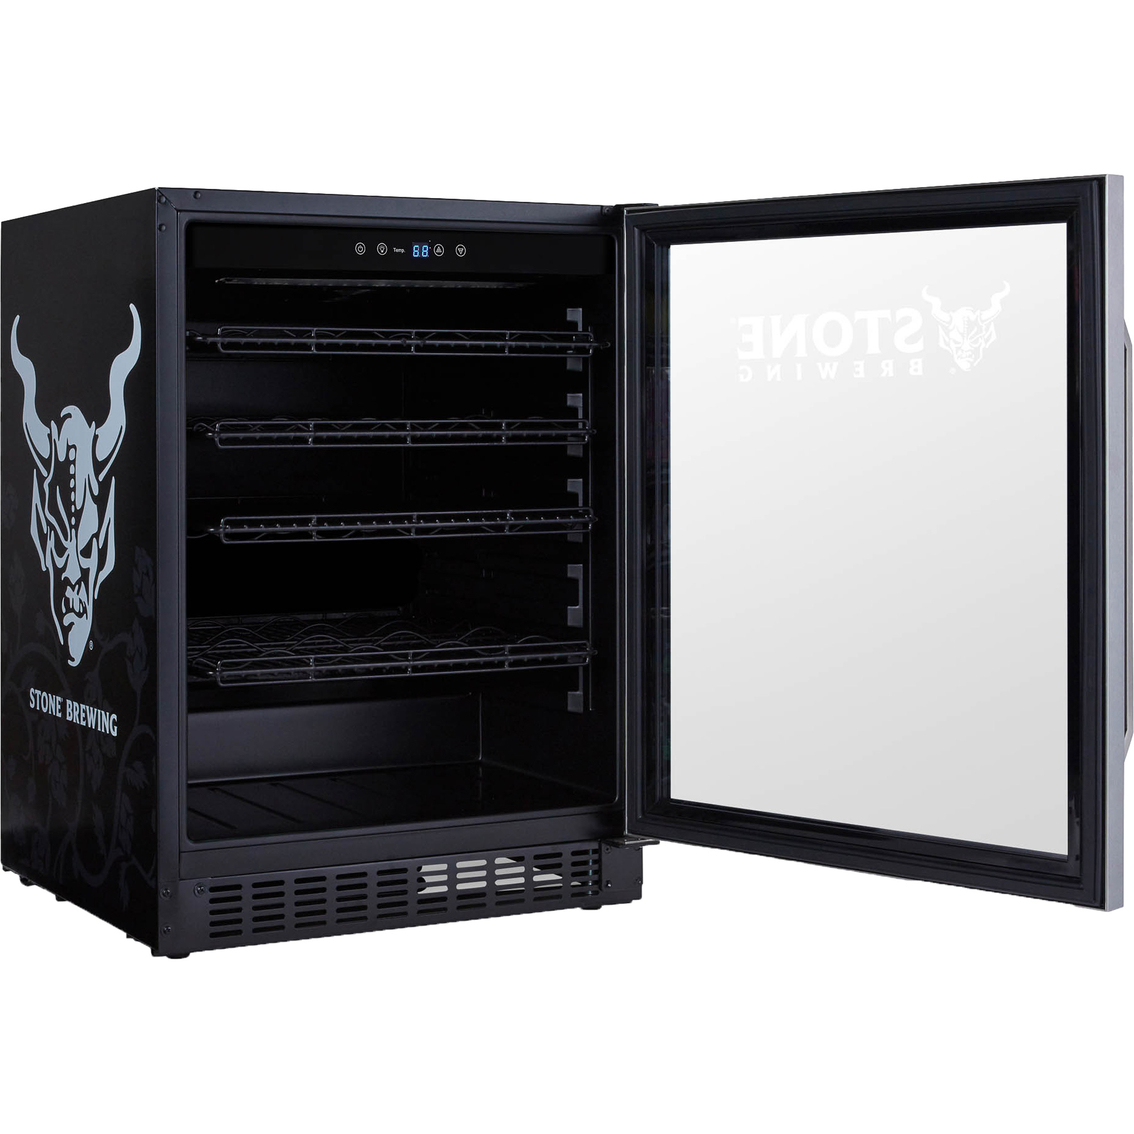 New Air LLC Stone Brewing 180 Can FlipShelf Beer and Beverage Refrigerator - Image 6 of 10